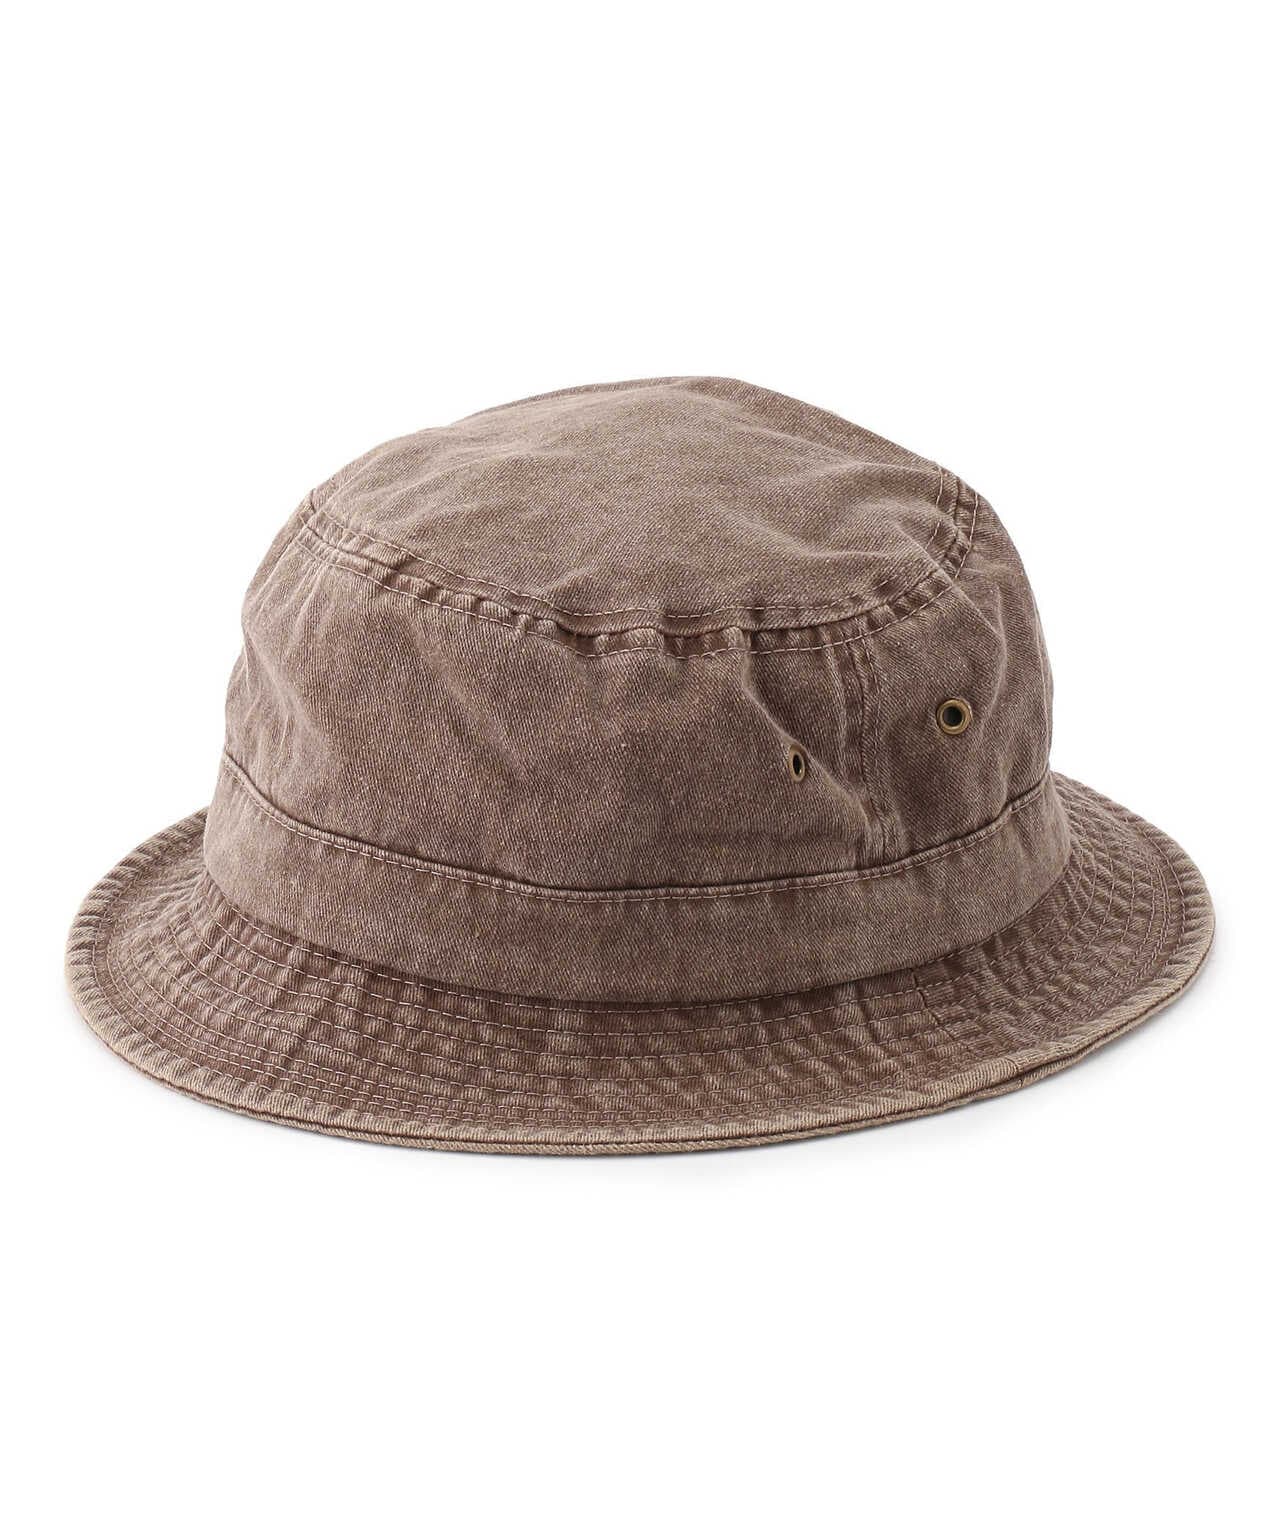 MEGA CAP/メガキャップ　Pigment Dyed Twill Washed Bucket Hat　ハット